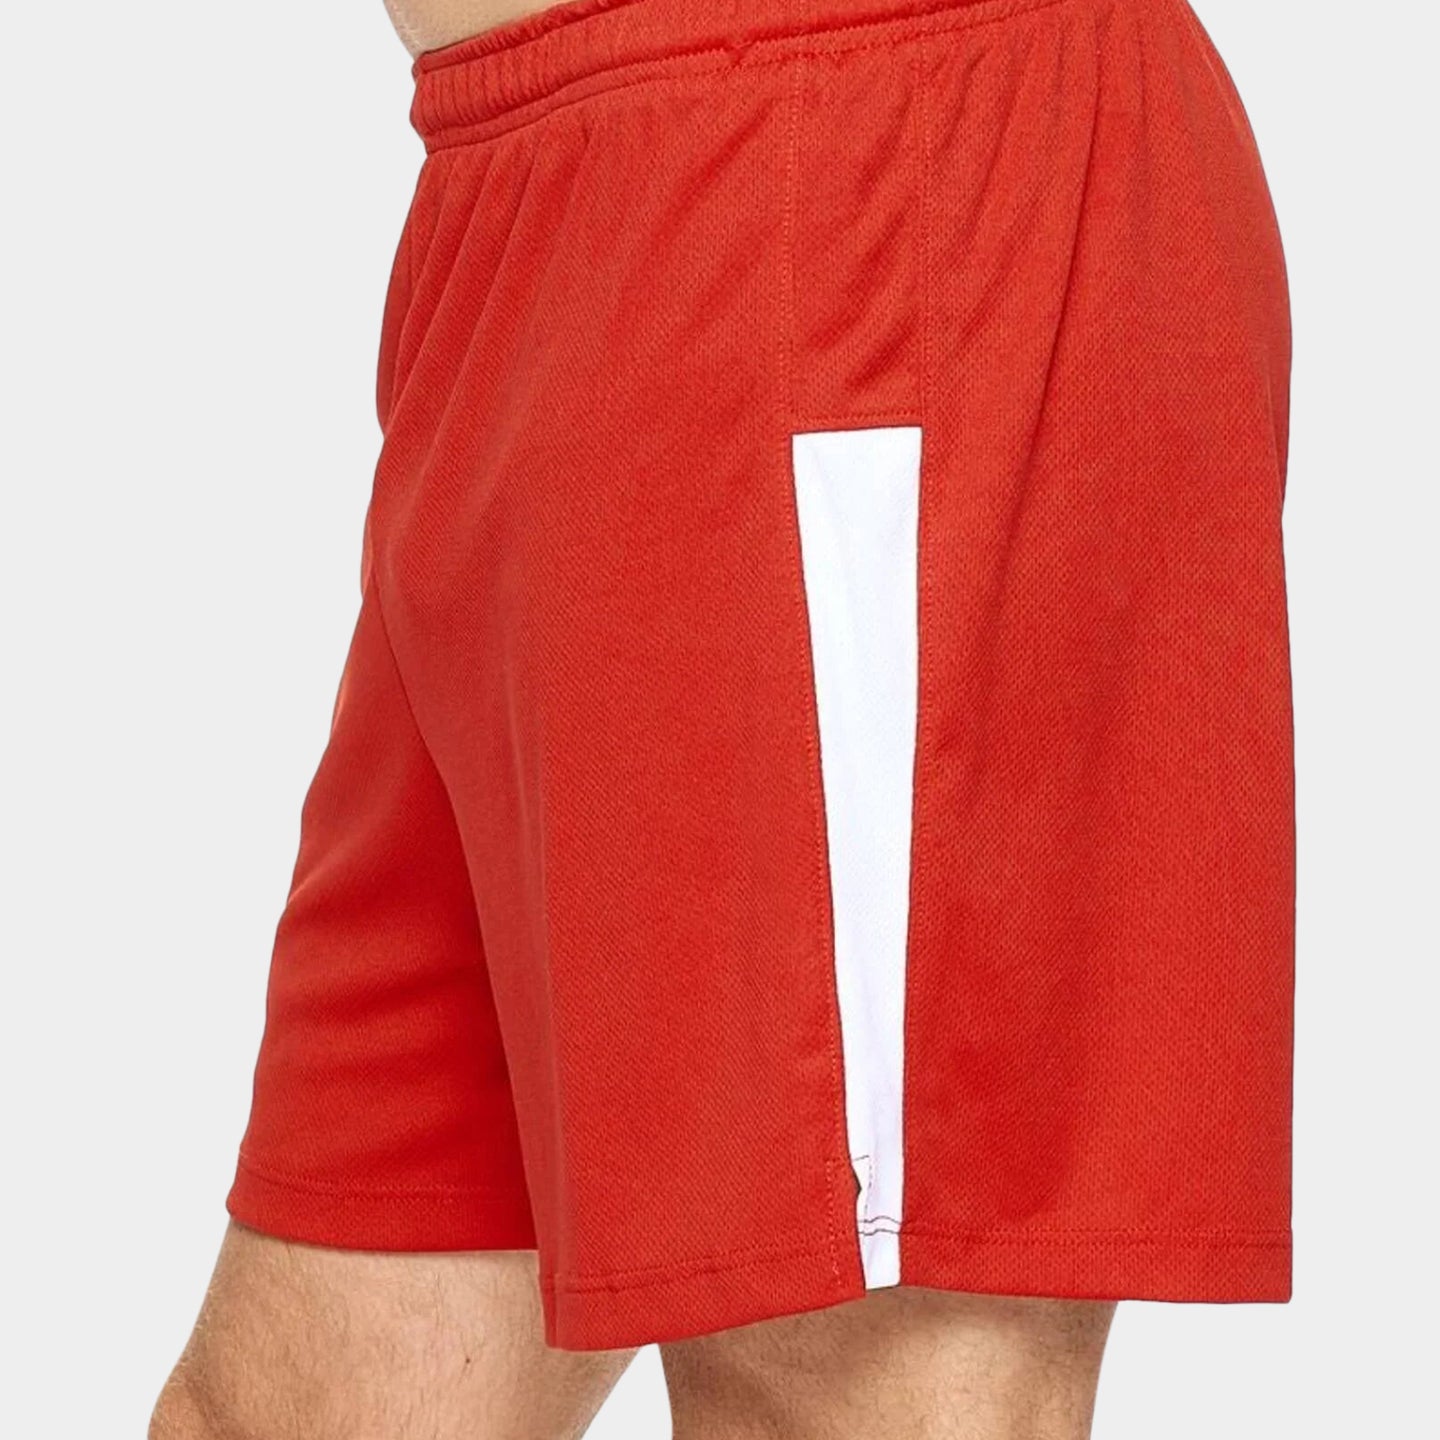 Expert Brand Oxymesh Men's Premium Active Training Shorts, XL, Red A1